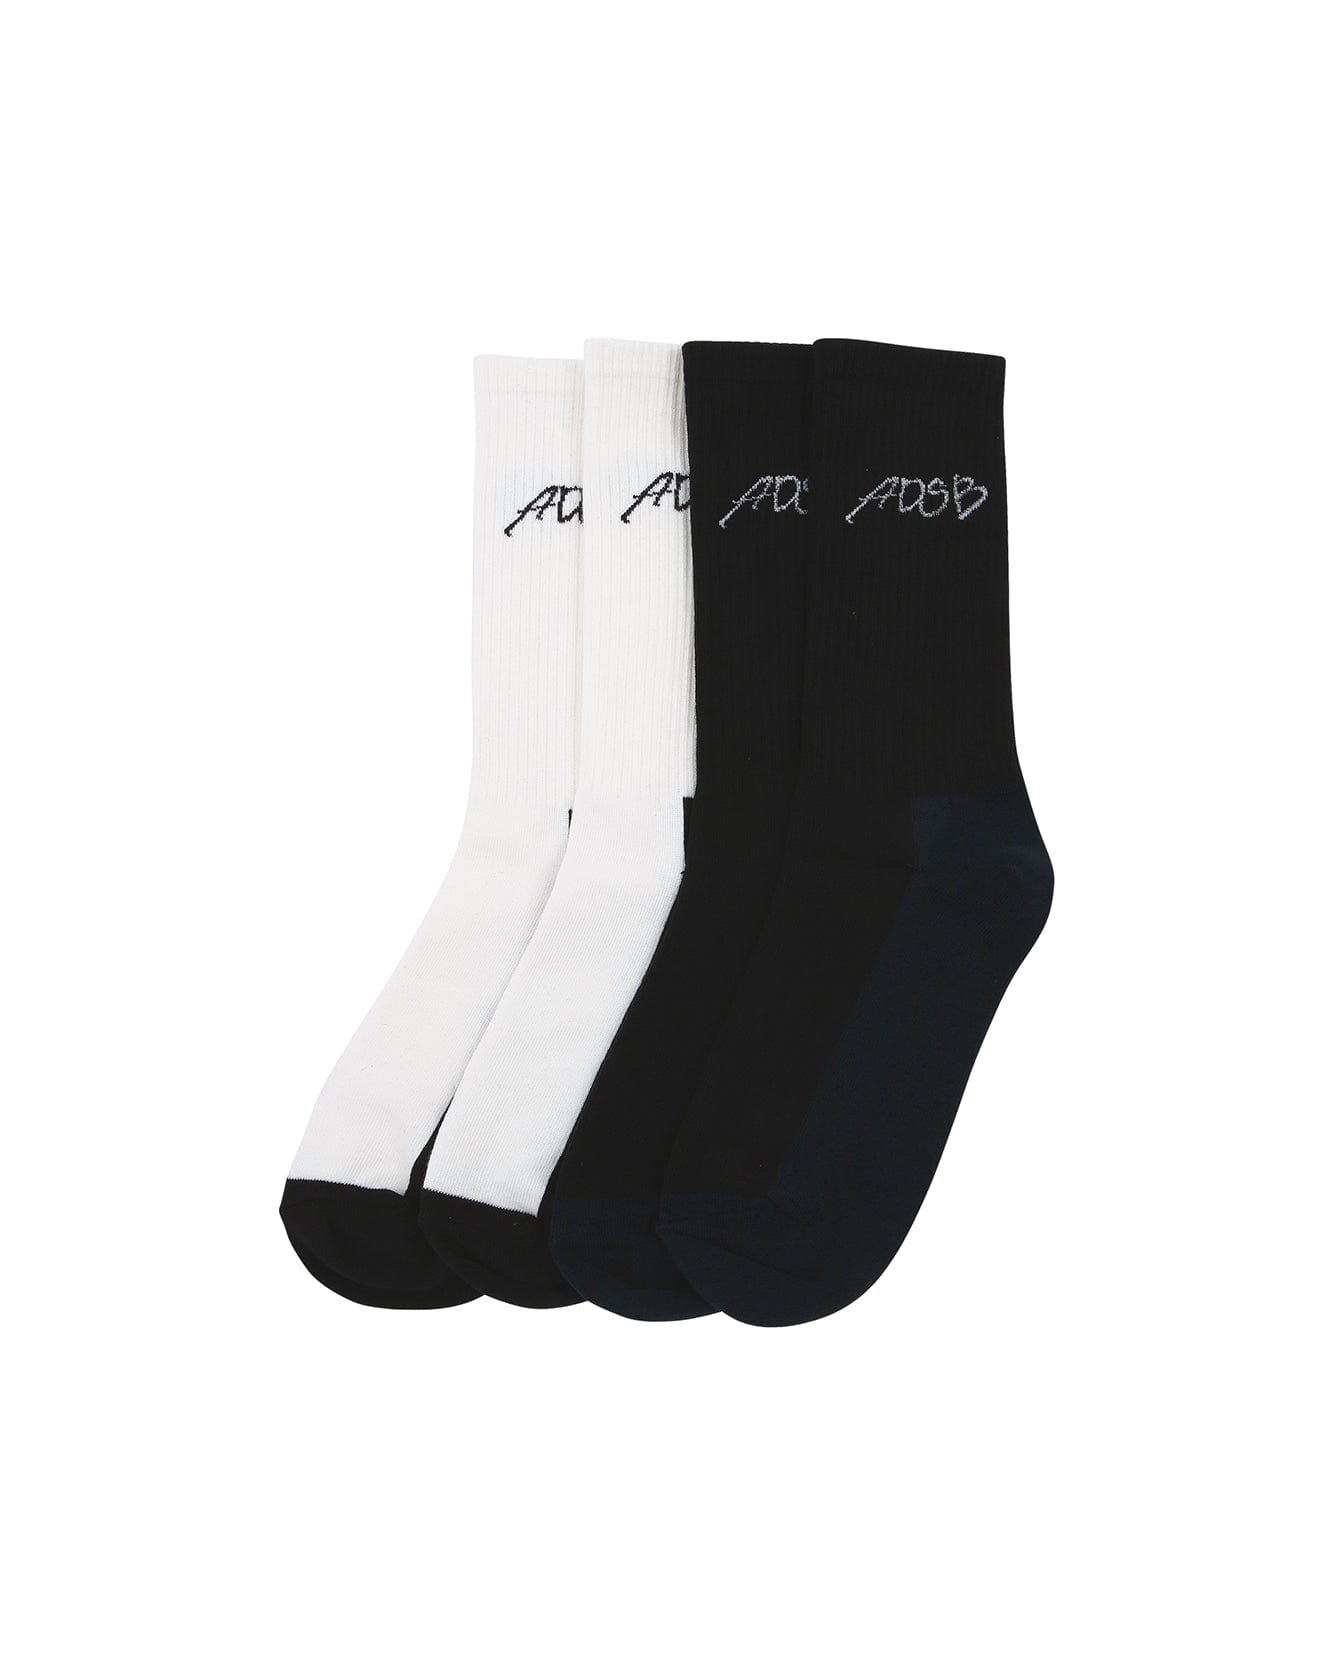 Andersson Bell ONE (ESSENTIAL) UNISEX ADSB CALLIGRAPHY SOCKS 2 PACK aaa332u(WHITE1/BLACK1)